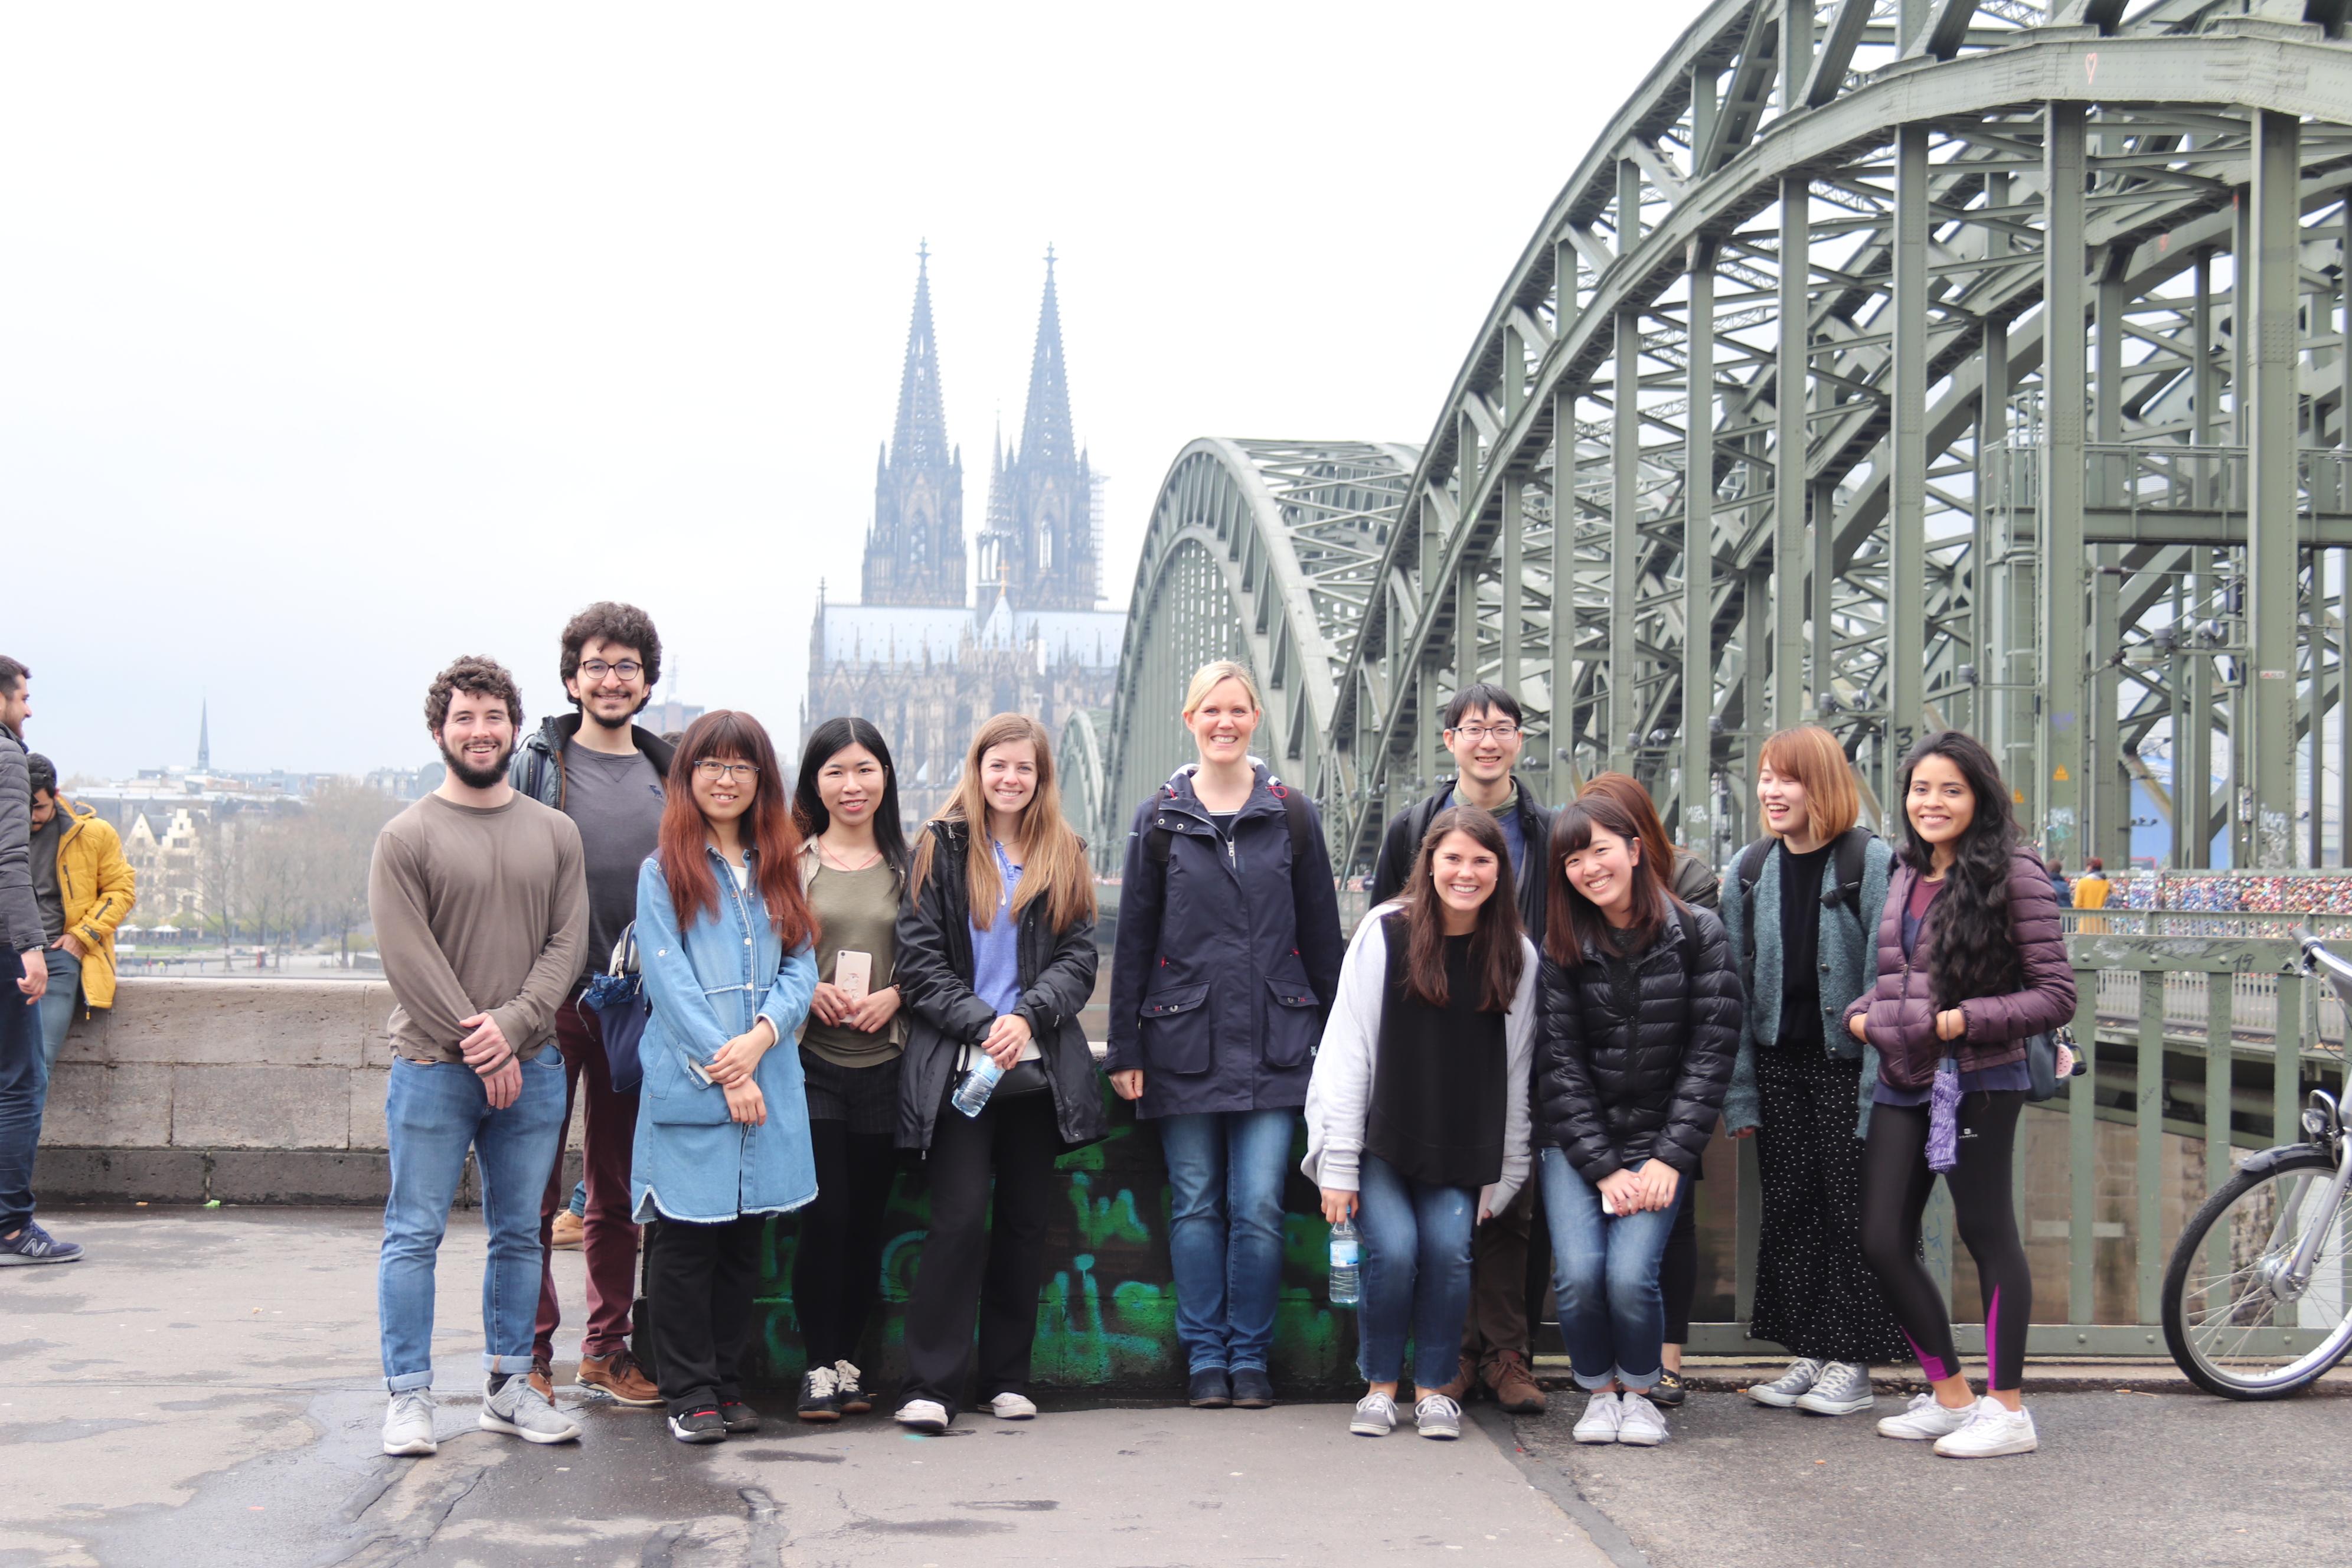 Group picture in front of the Hohenzollern bridge an the cologne cathedral in the background